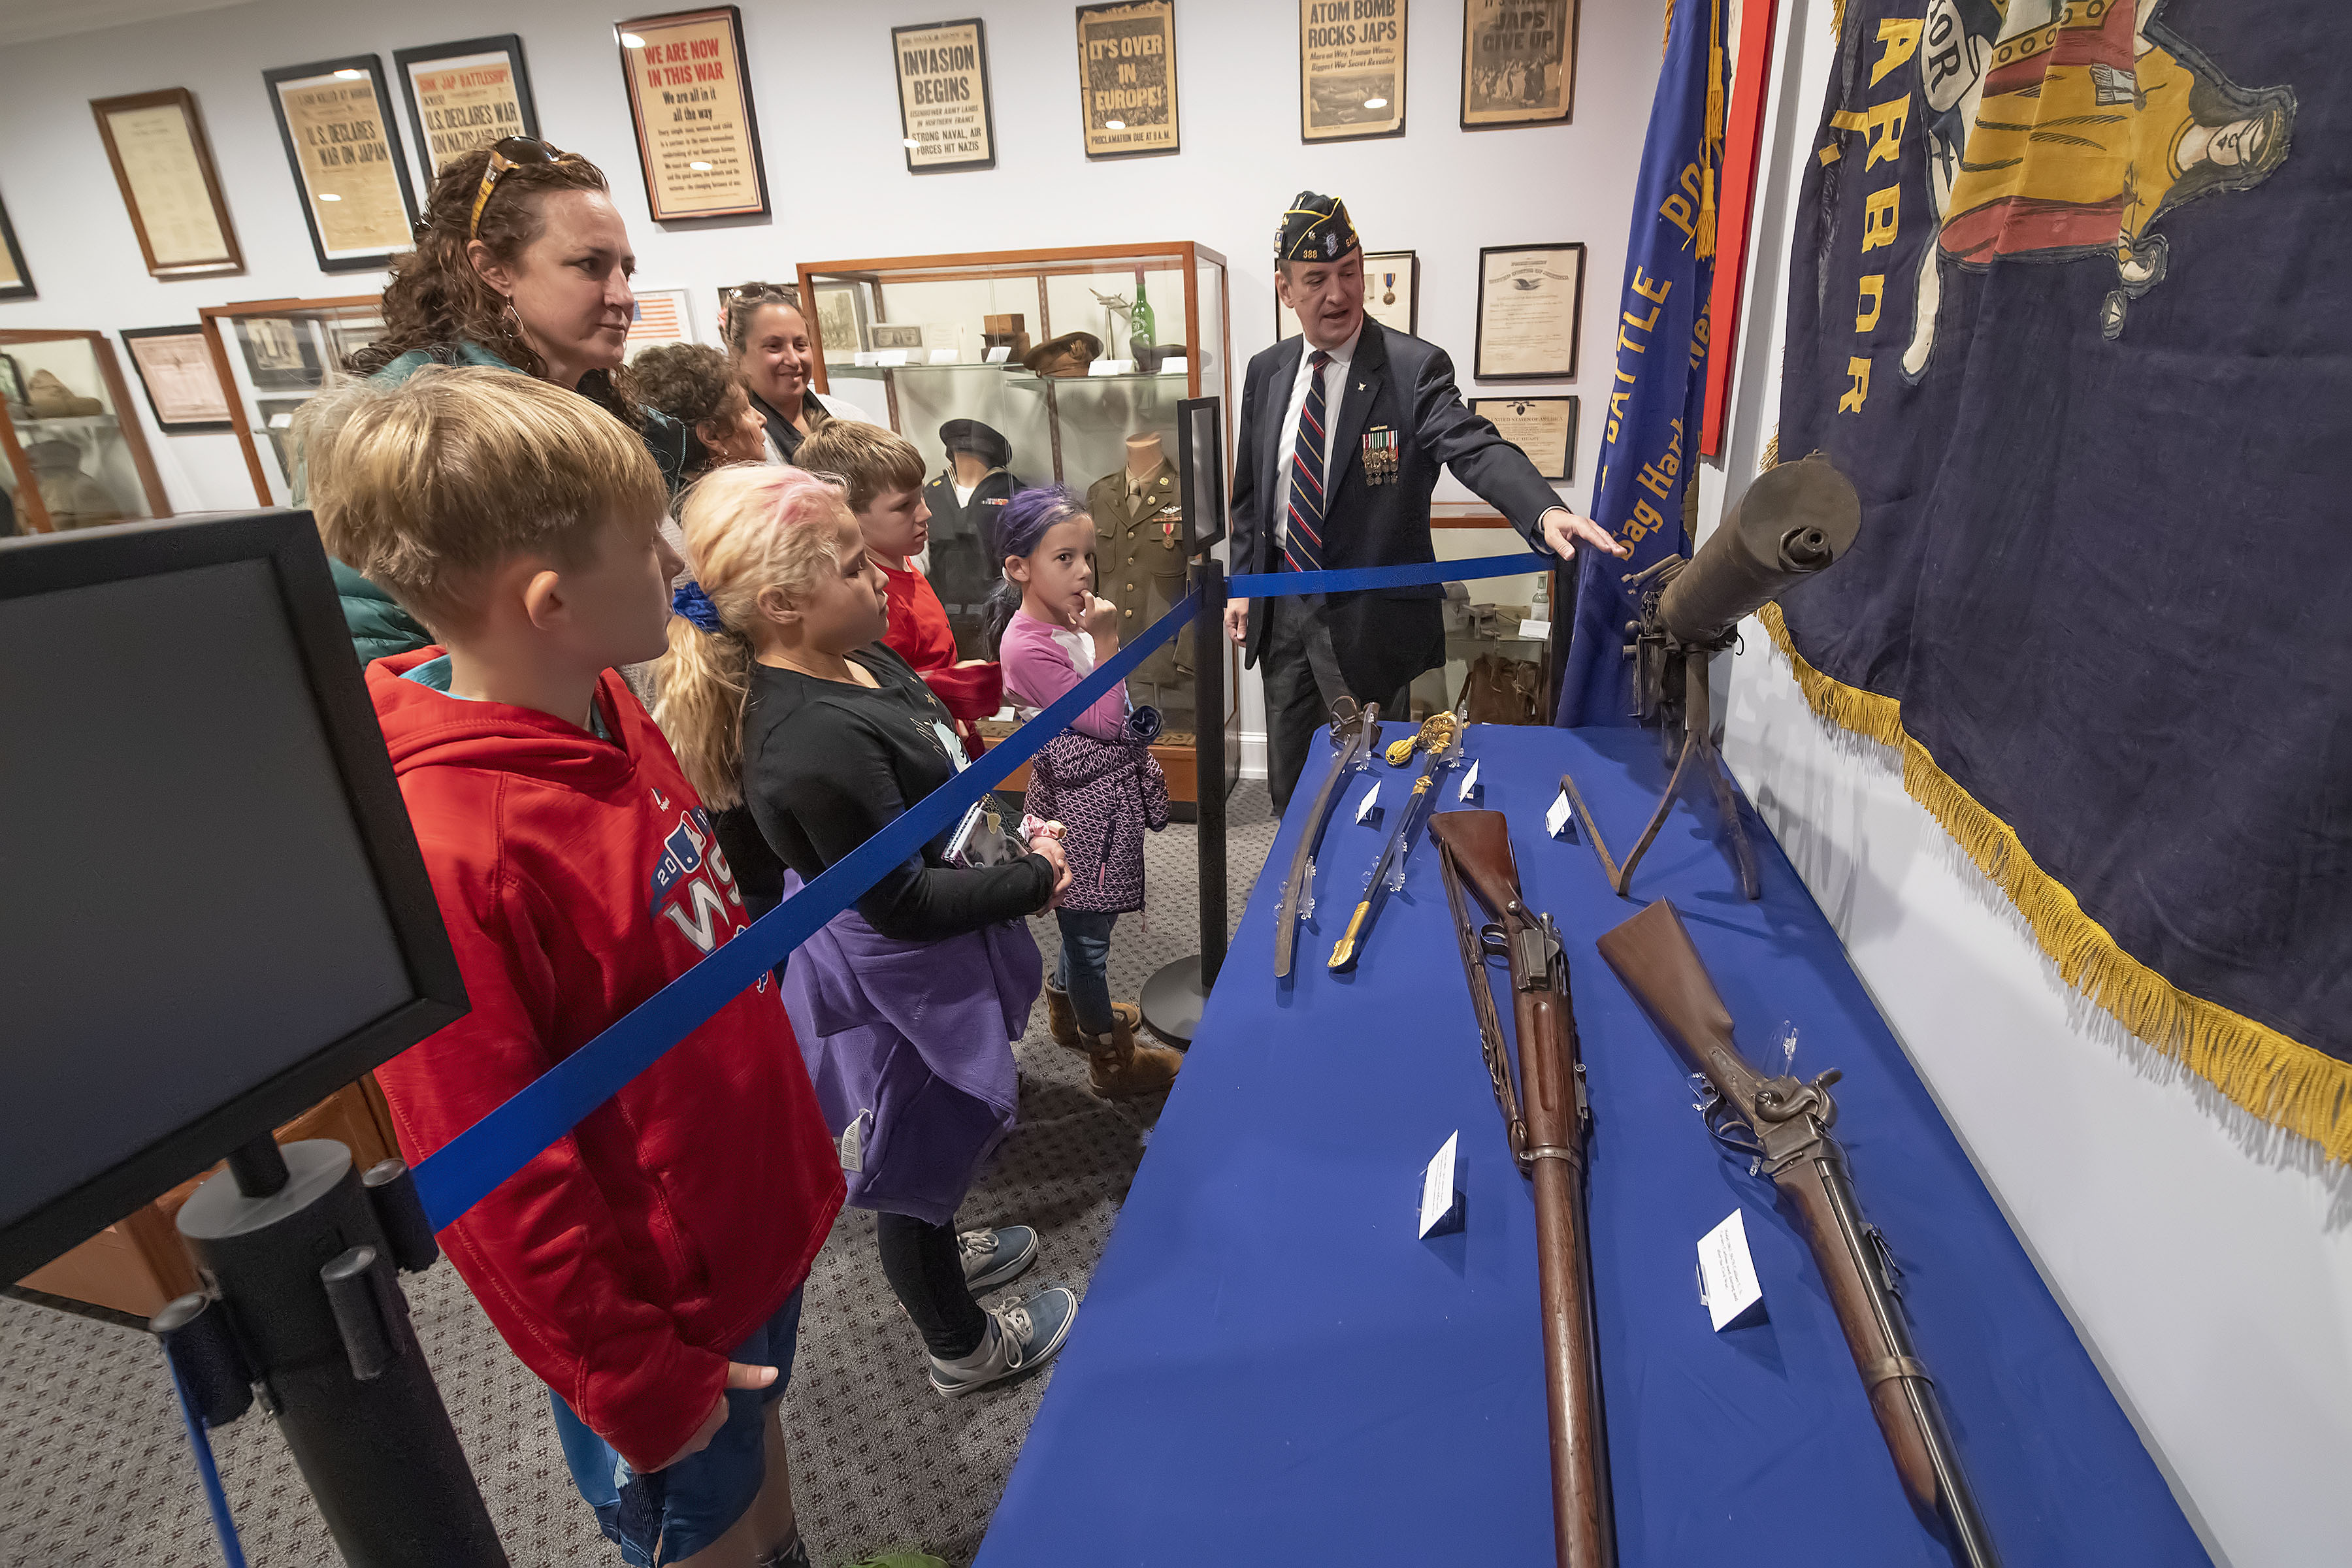 Legion Past Commander Paul Gerecke shows off some of the weapons on display during the grand opening of the new museum space at the American Legion Chelberg & Battle Post 388 following the 2019 Veterans Day Parade on Monday.    MICHAEL HELLER